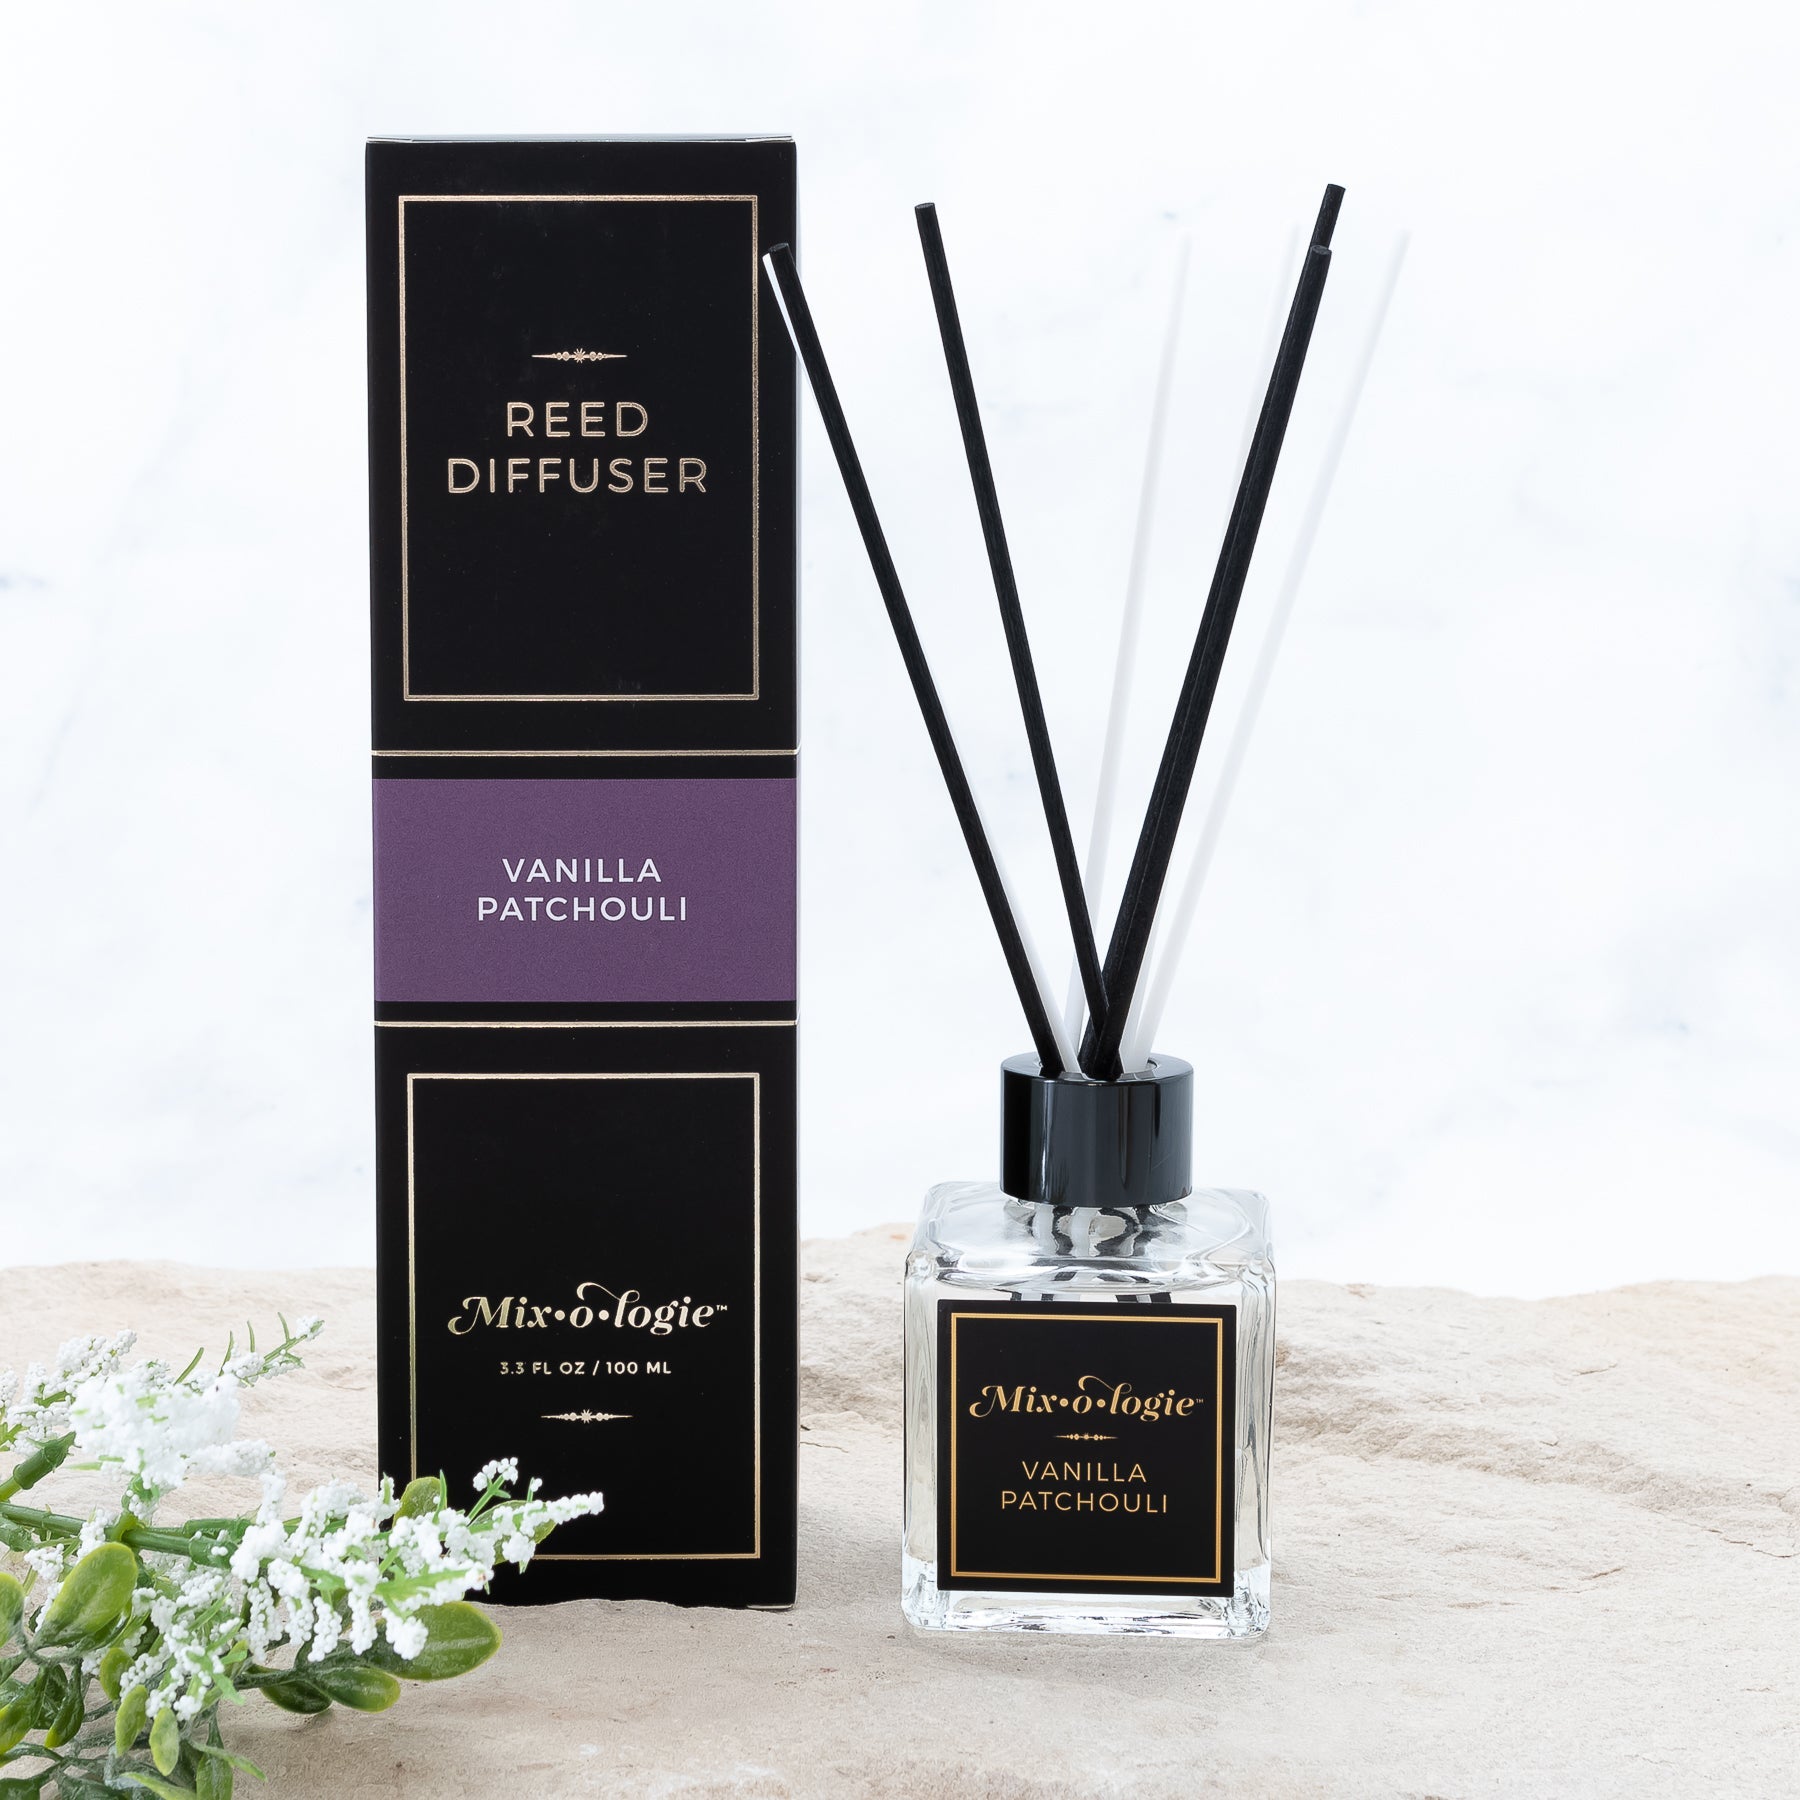 Vanilla Patchouli - Reed Diffuser - Tester